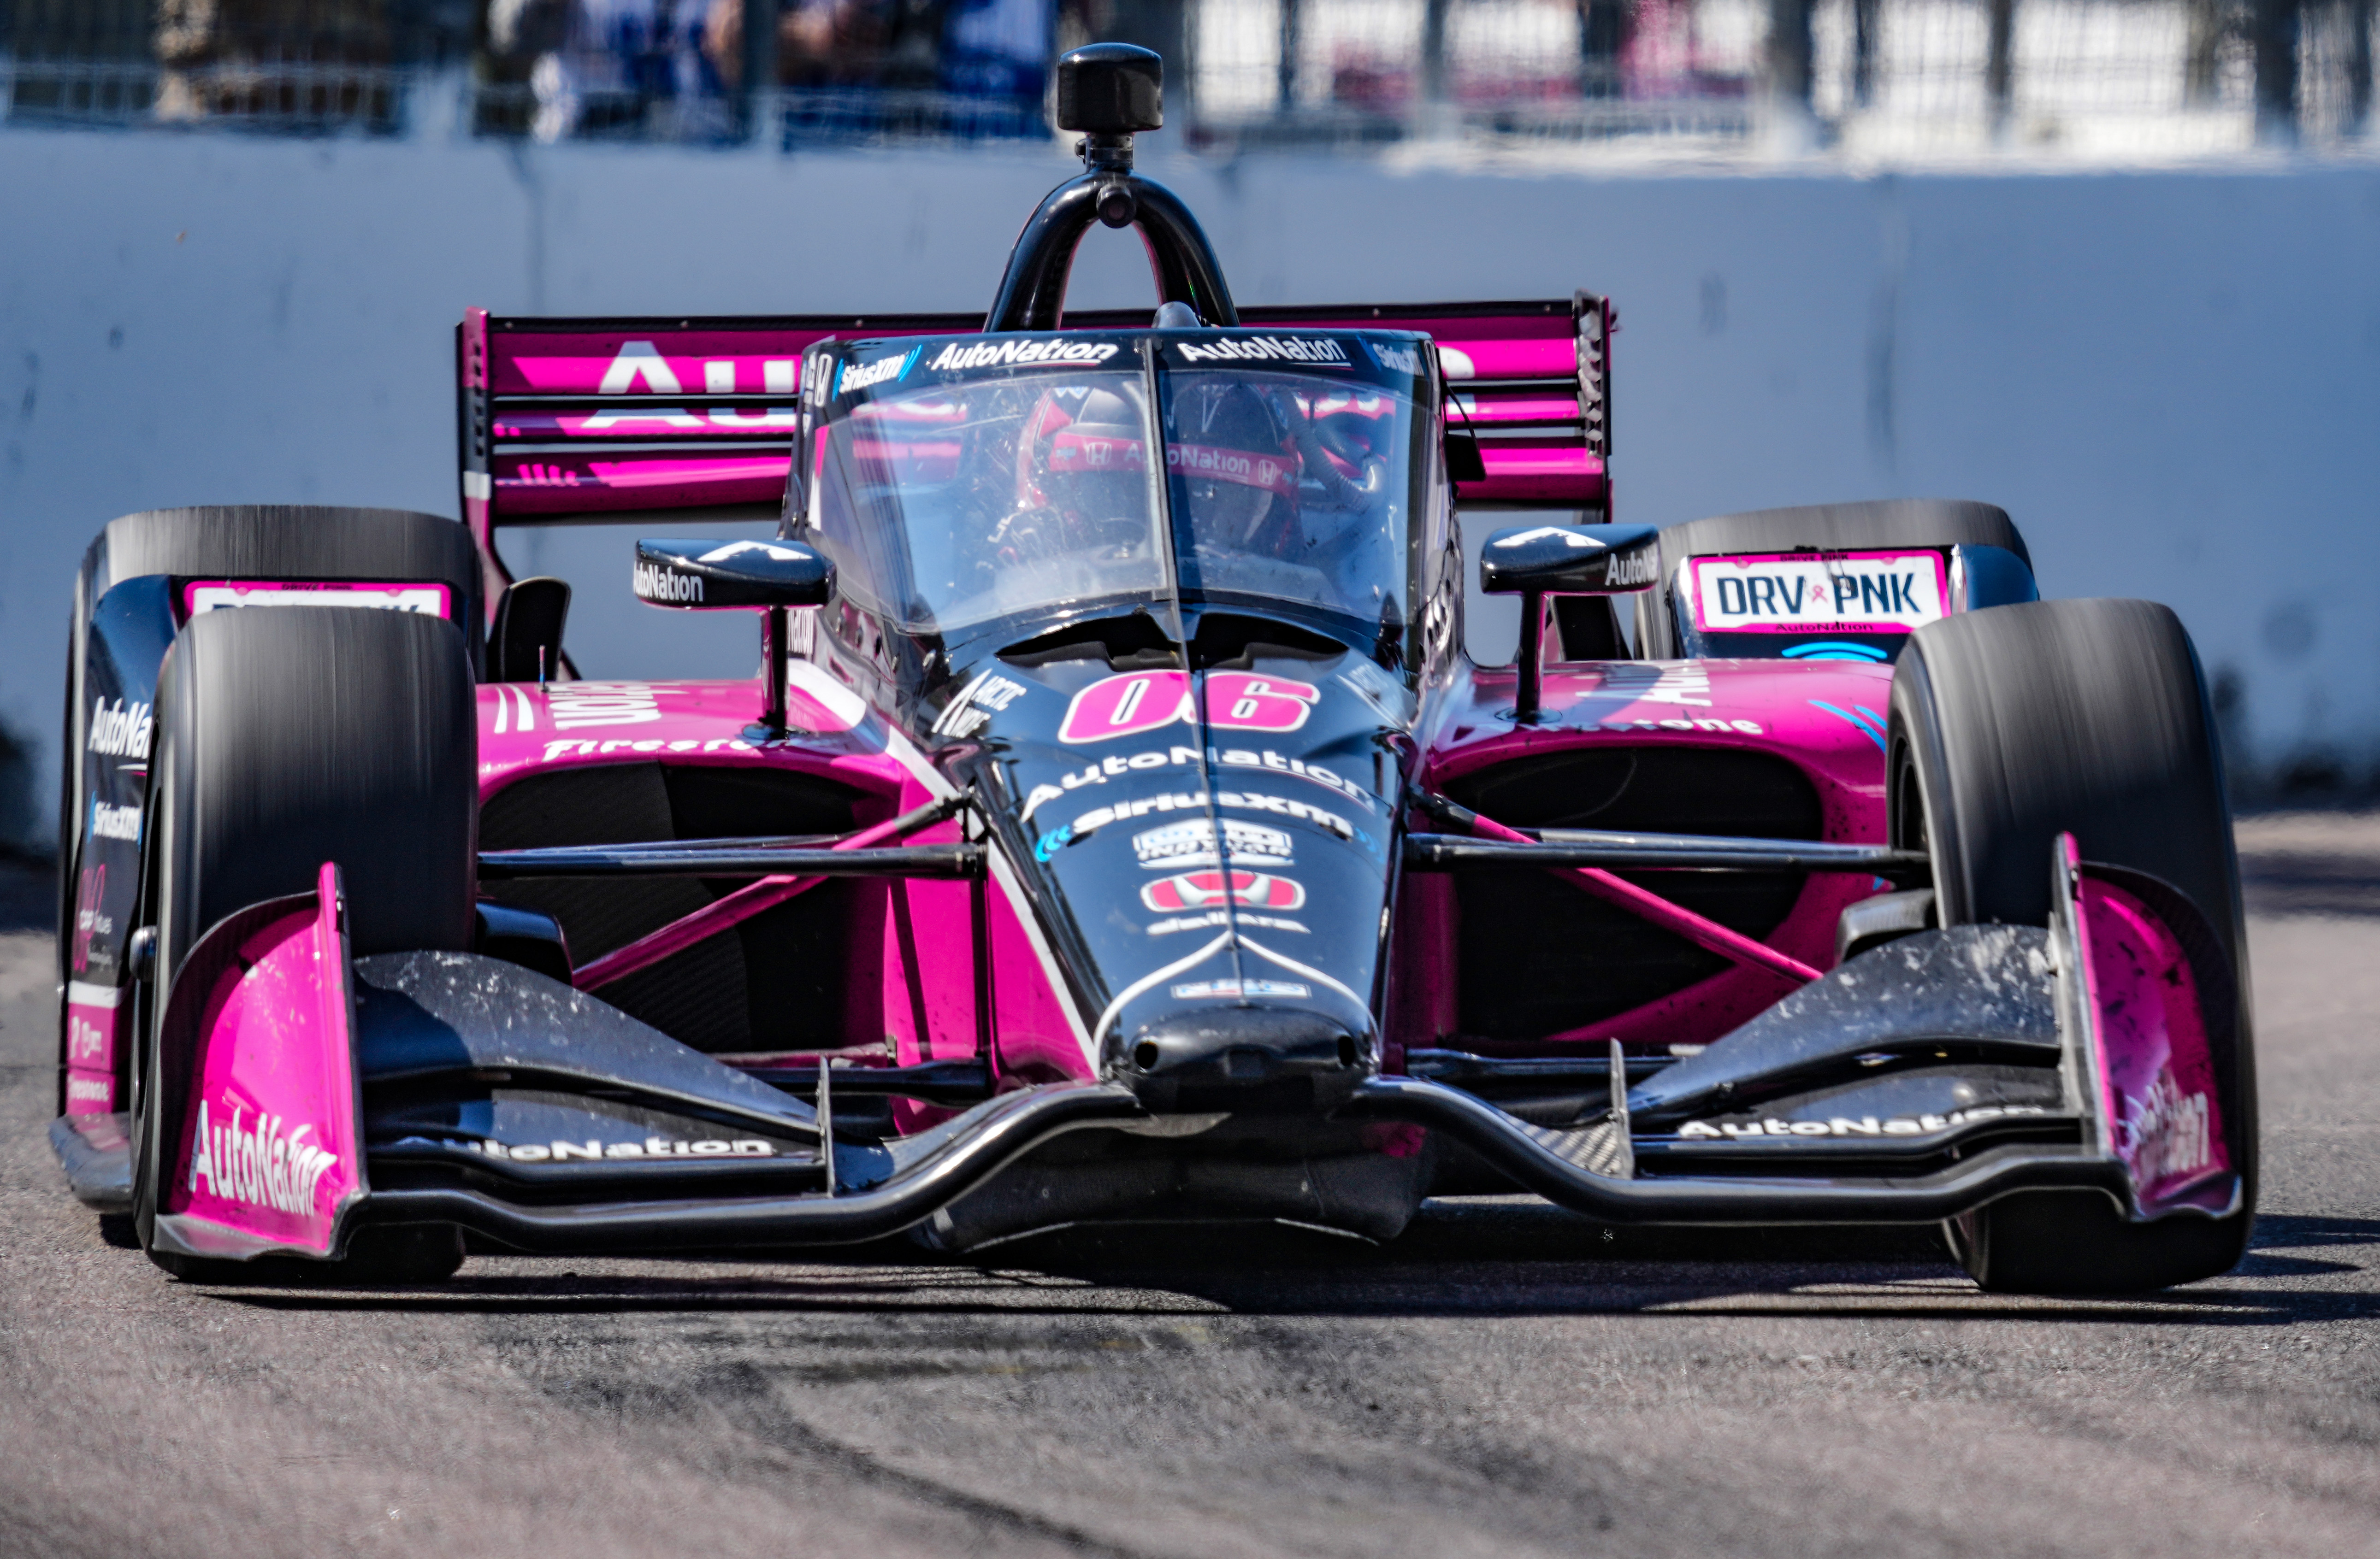 Helio Castroneves of Brazil and driver of the #06 AutoNation / SiriusXM Meyer Shank Racing Honda races during the NTT IndyCar Series Firestone Grand Prix of St. Peterburg on February 27, 2022 in Saint Petersburg, Florida.